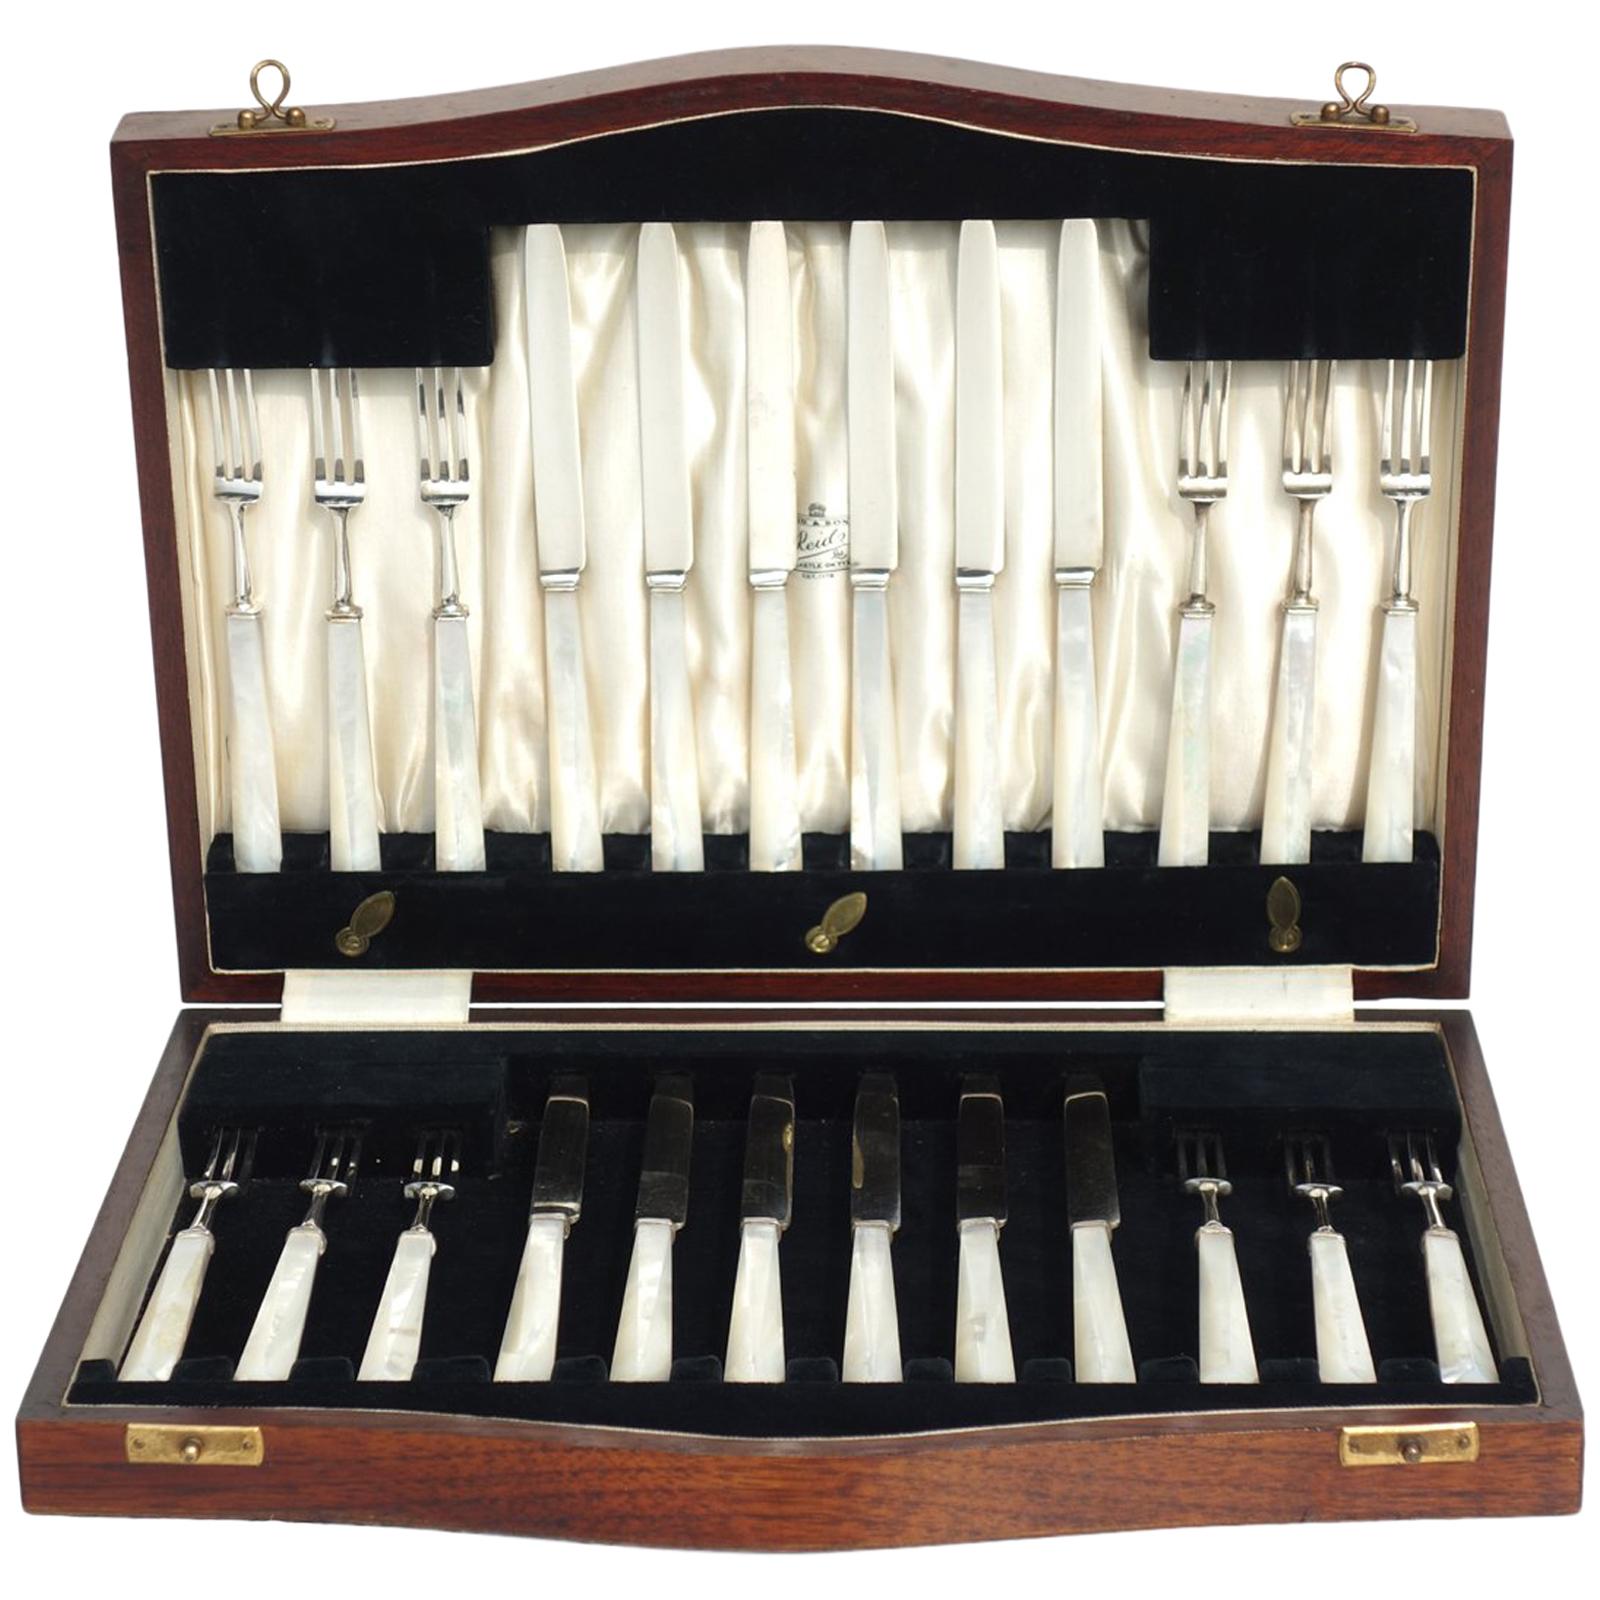 https://a.1stdibscdn.com/1920s-england-by-reid-son-antique-silver-and-mother-of-pearl-cutlery-flatware-for-sale/1121189/f_124151111540609669372/12415111_master.jpg